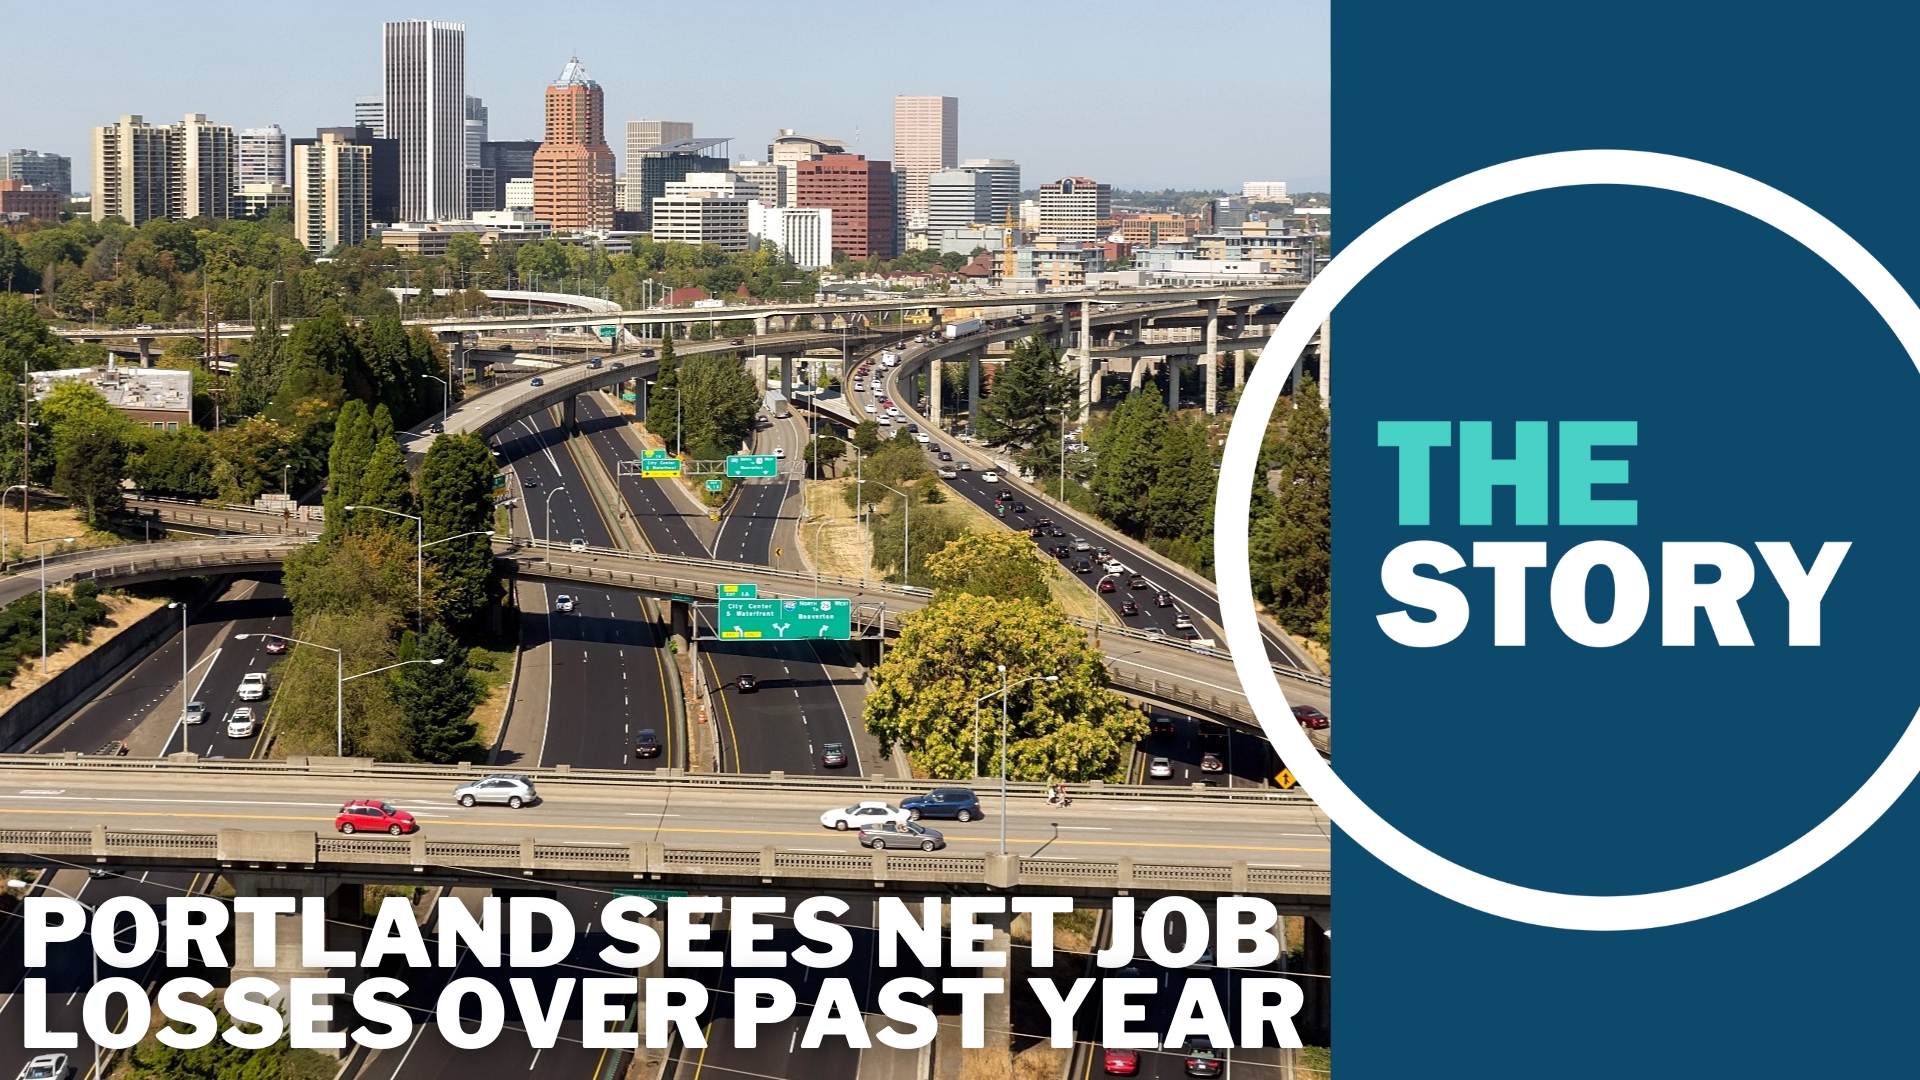 The greater Portland region law a net loss of jobs from April 2023 to April 2024, driven by layoffs, retirements and a decline in new arrivals.